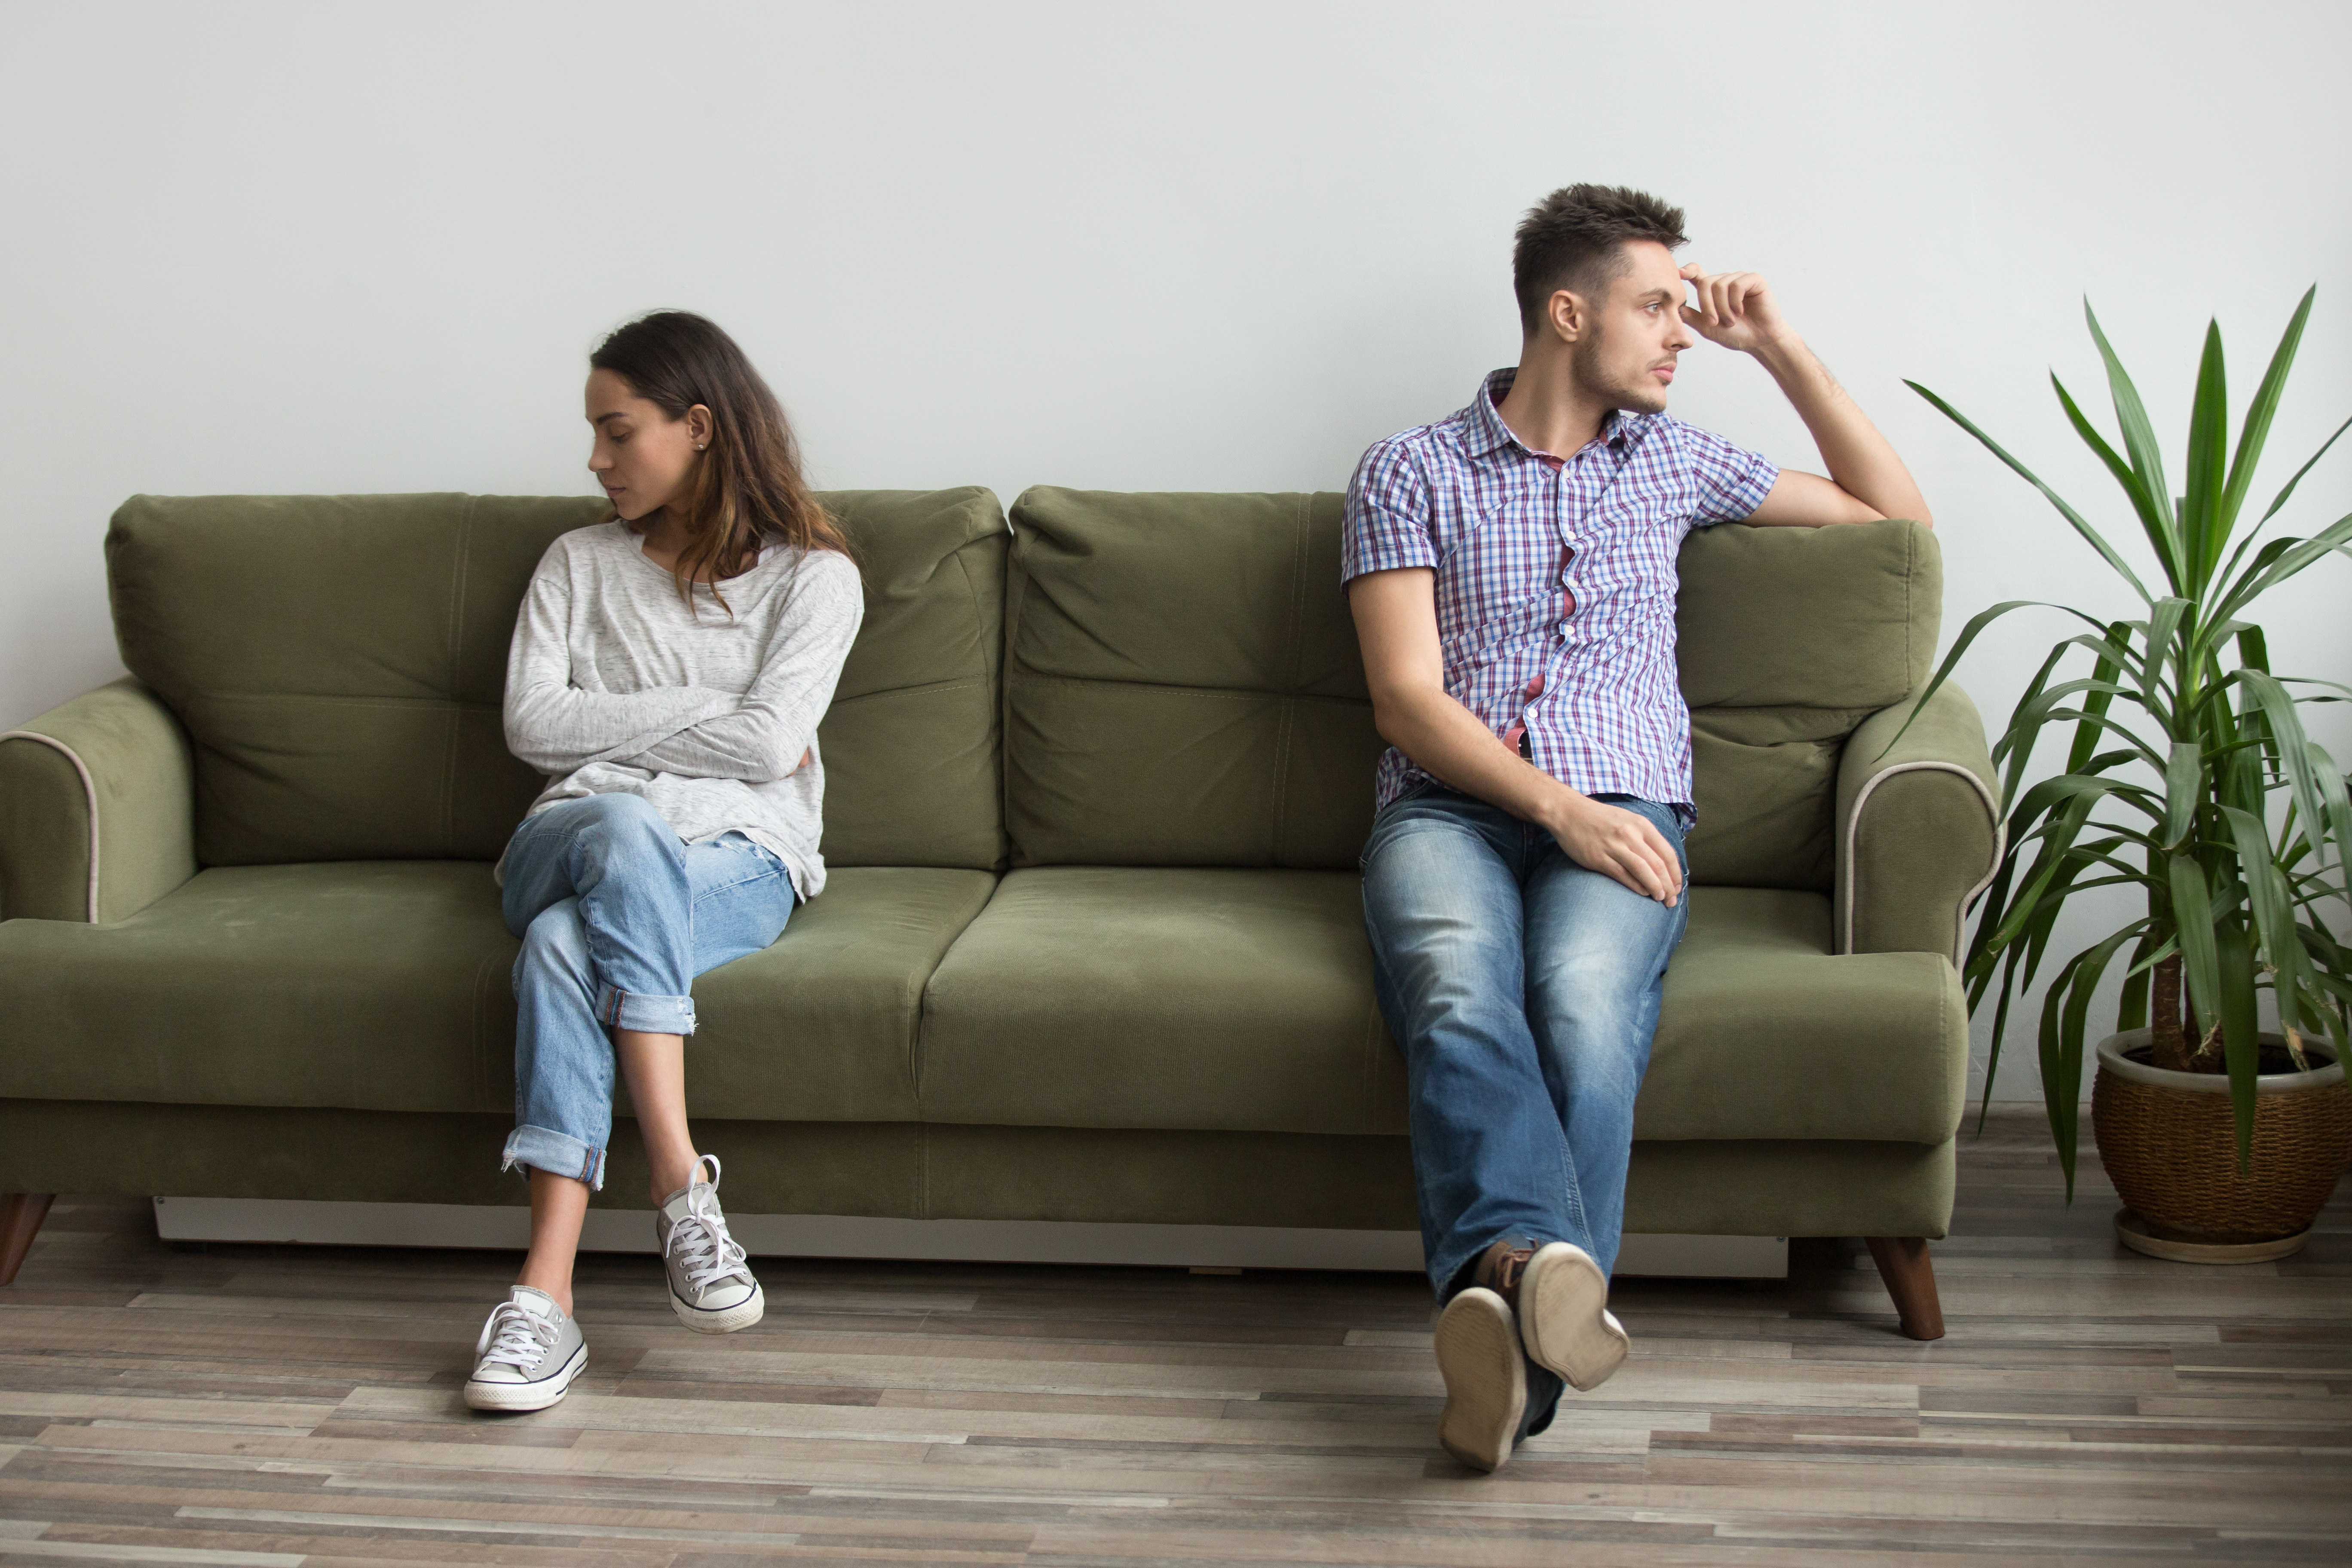 A sad couple not talking to each other | Source: Shutterstock